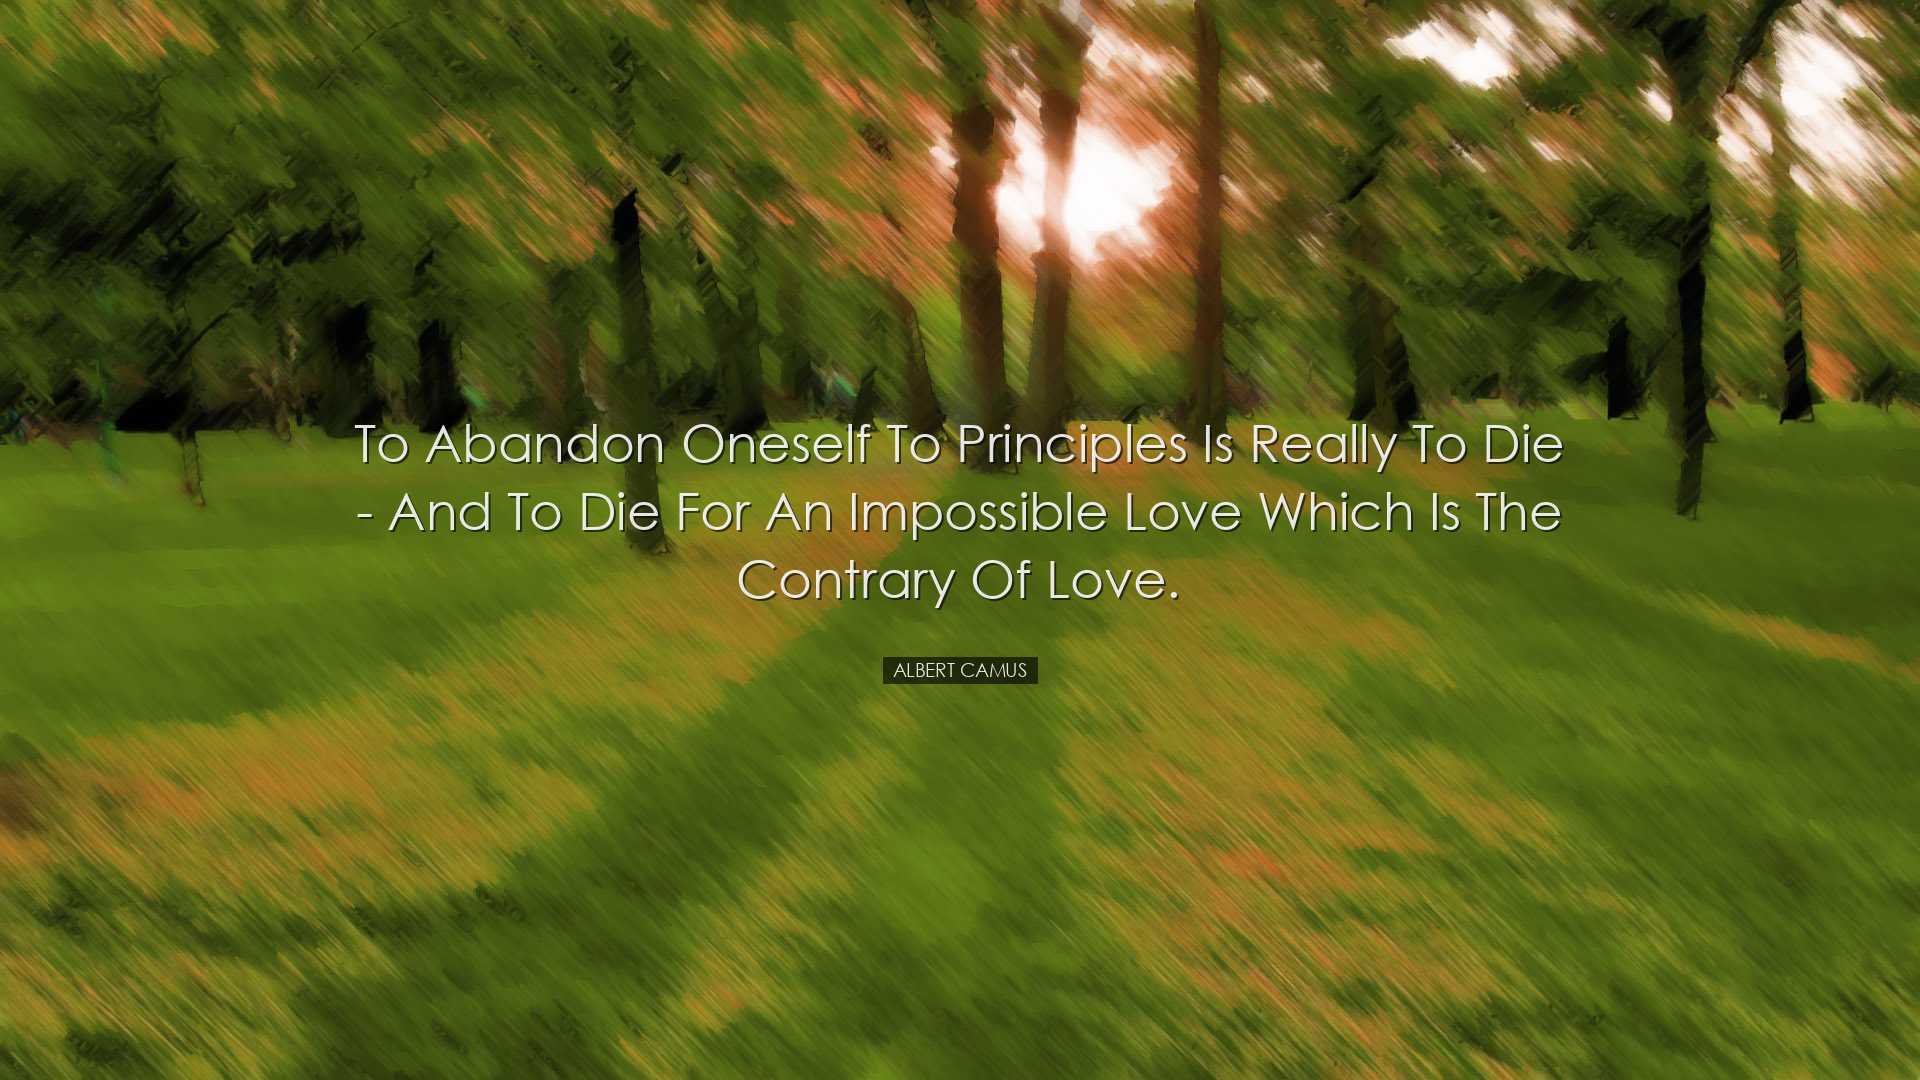 To abandon oneself to principles is really to die - and to die for